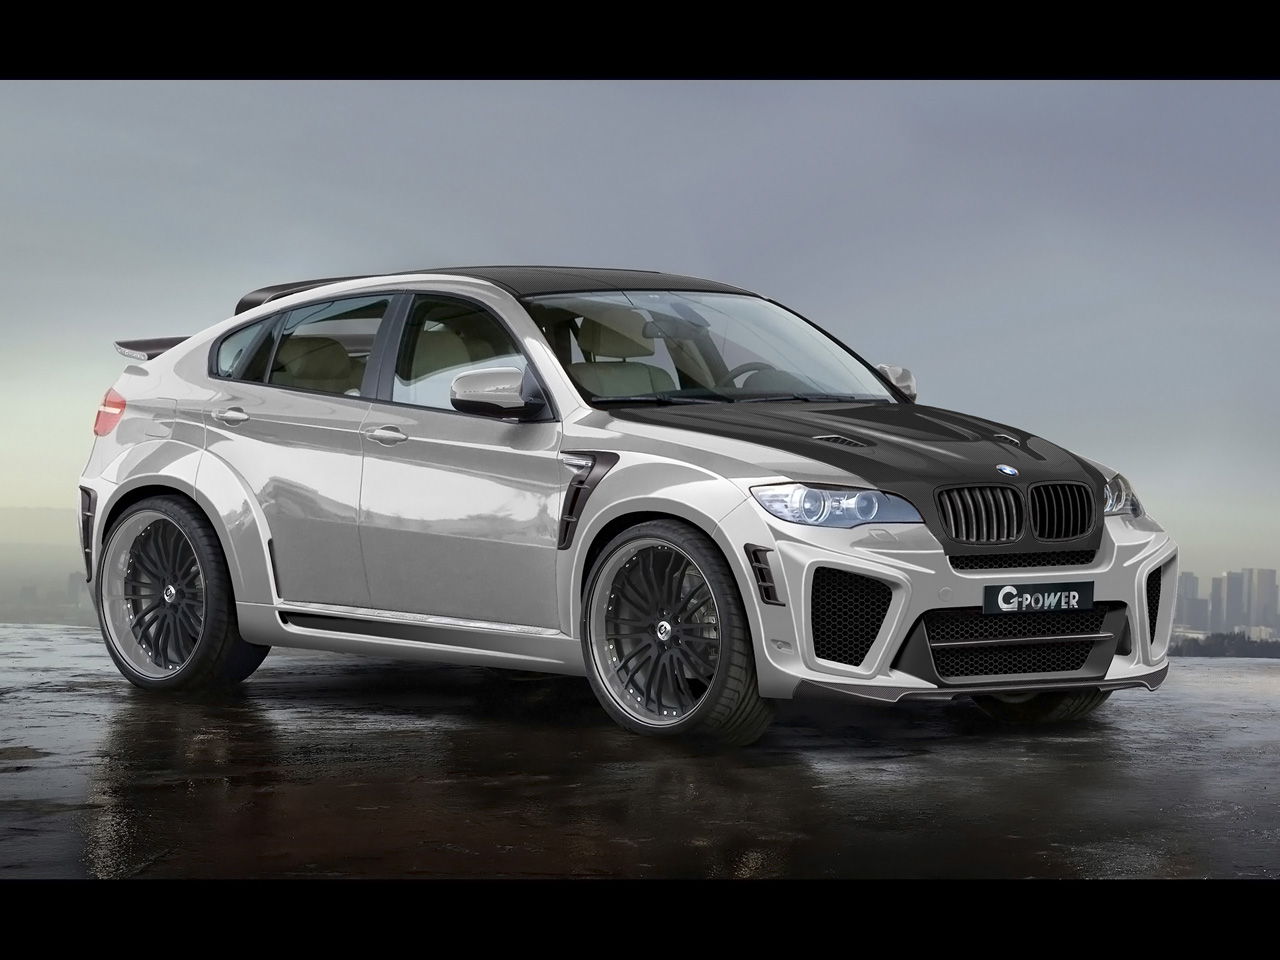 2010 G-Power BMW X6 Typhoon RS Ultimate